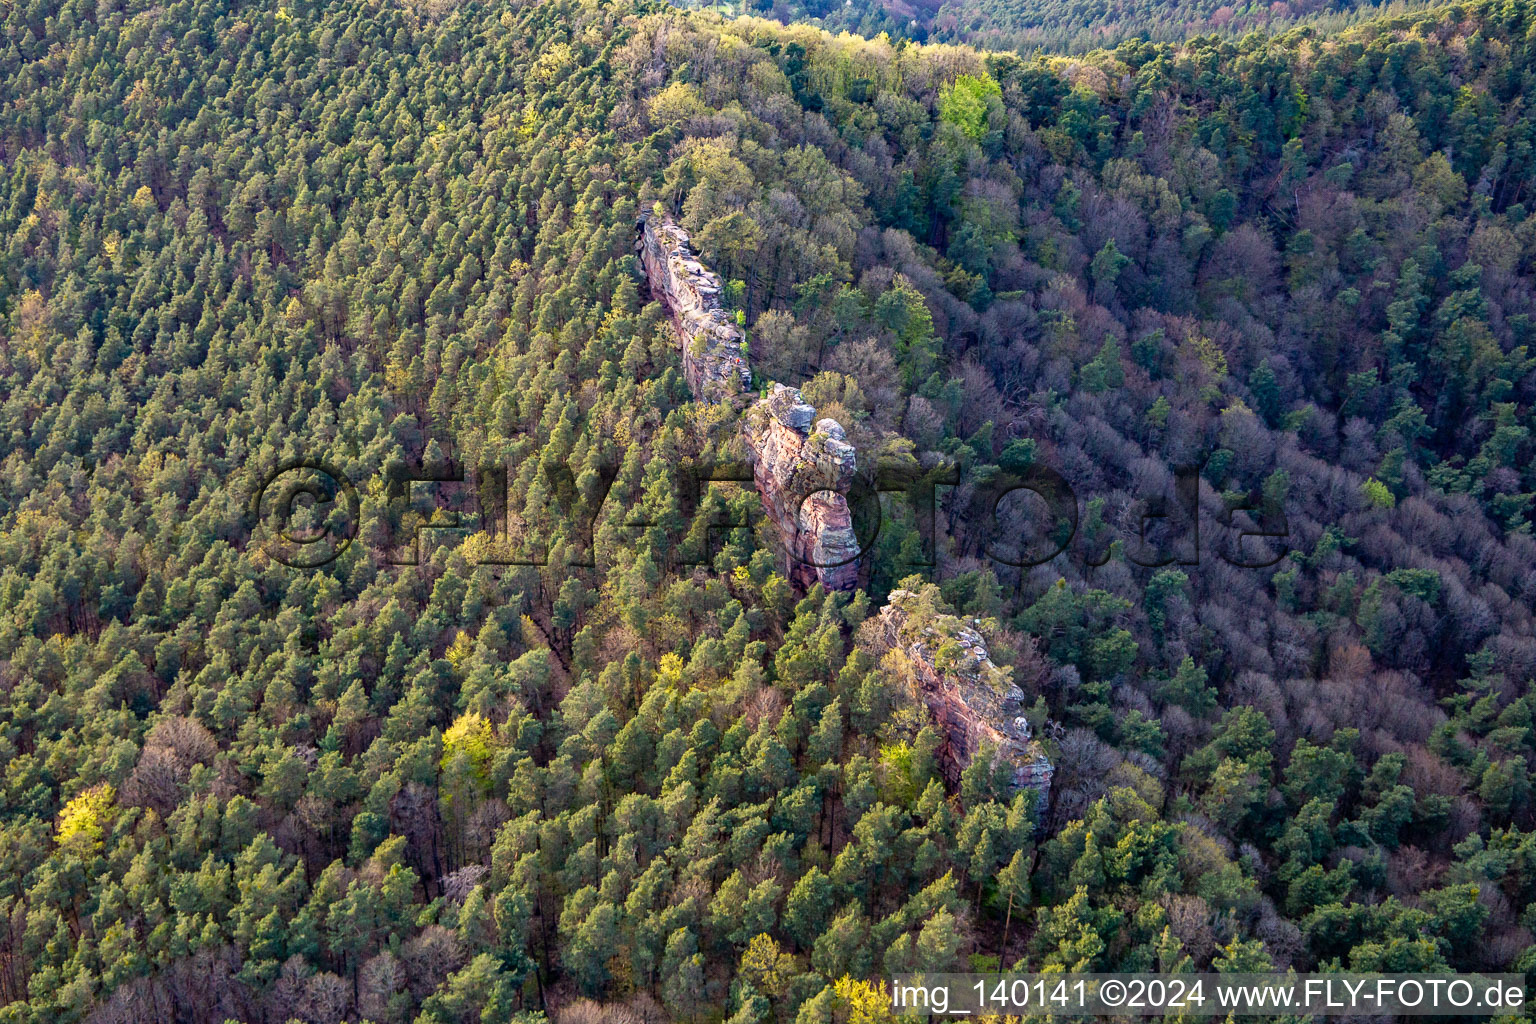 Aerial photograpy of Luger vulture stones in Lug in the state Rhineland-Palatinate, Germany